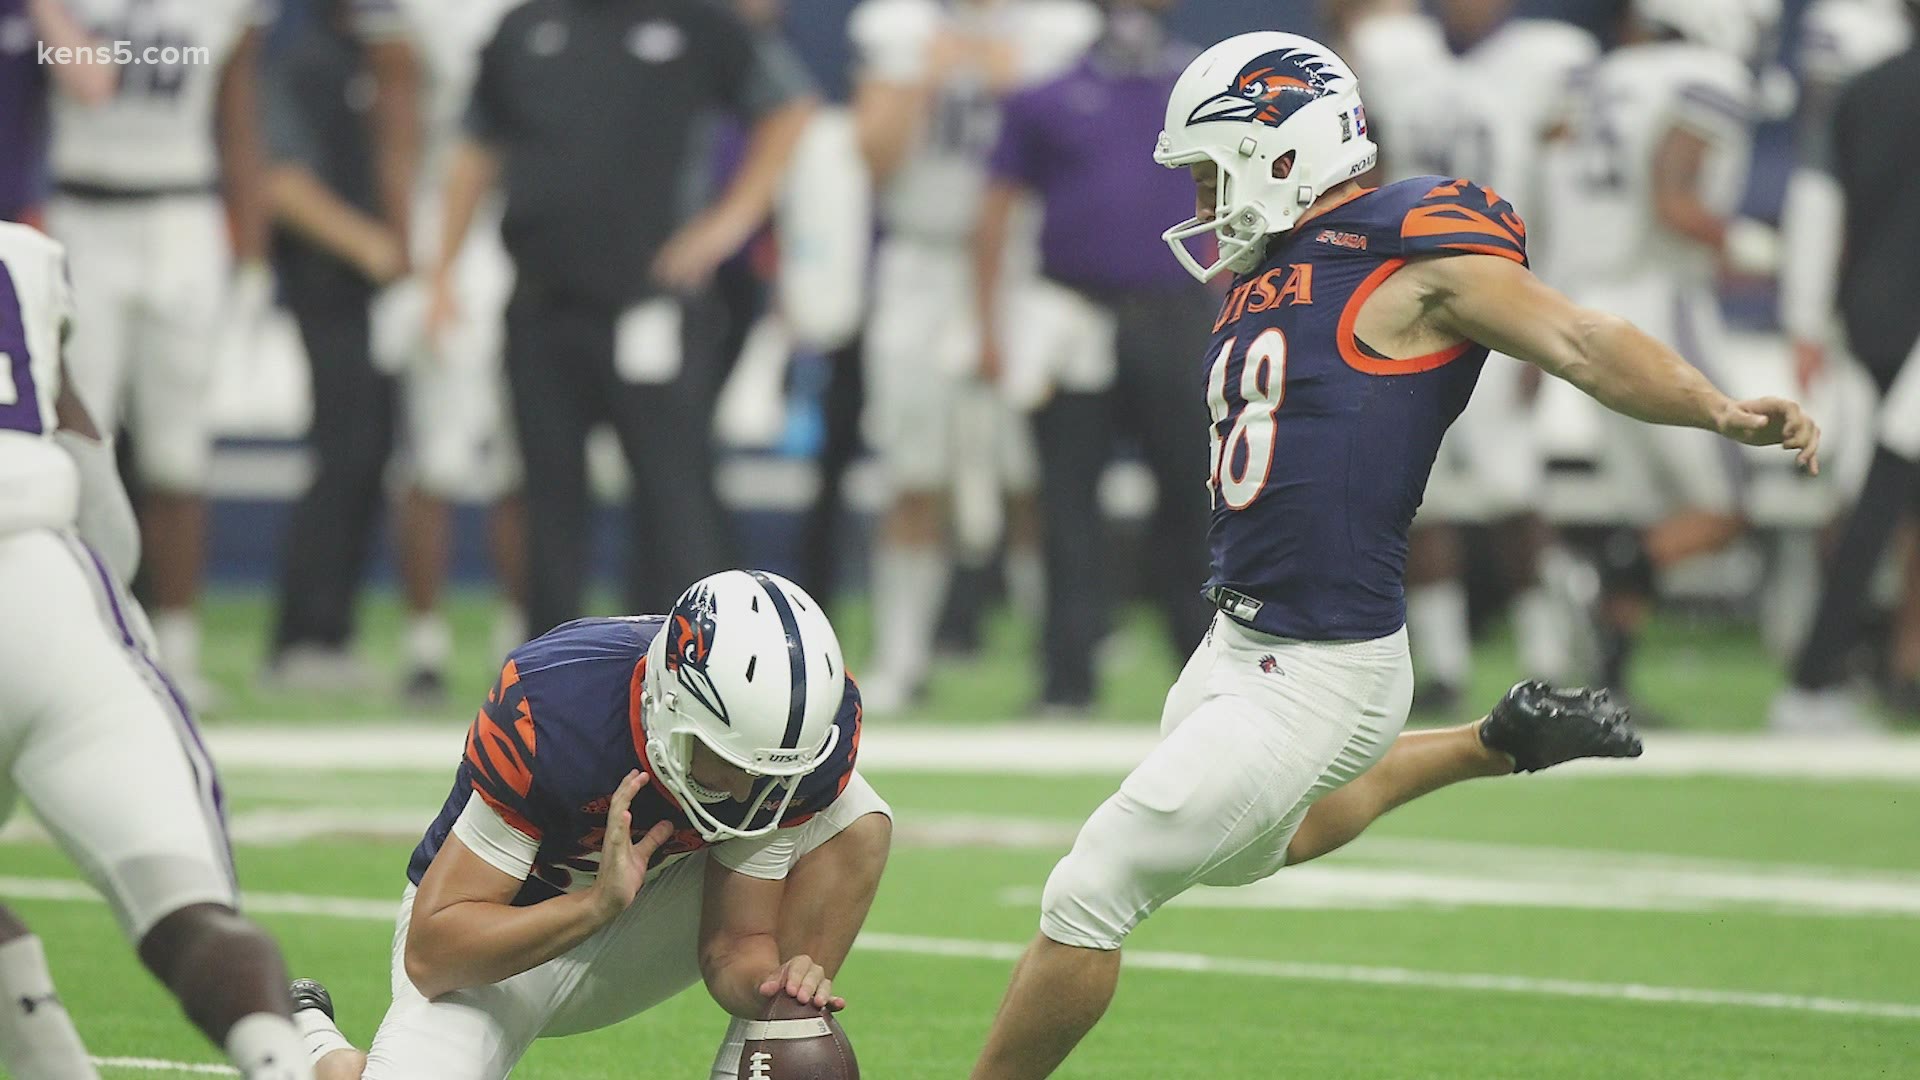 The UTSA Roadrunners have been hard at work this spring setting the foundation for what they hope will be a historic season.